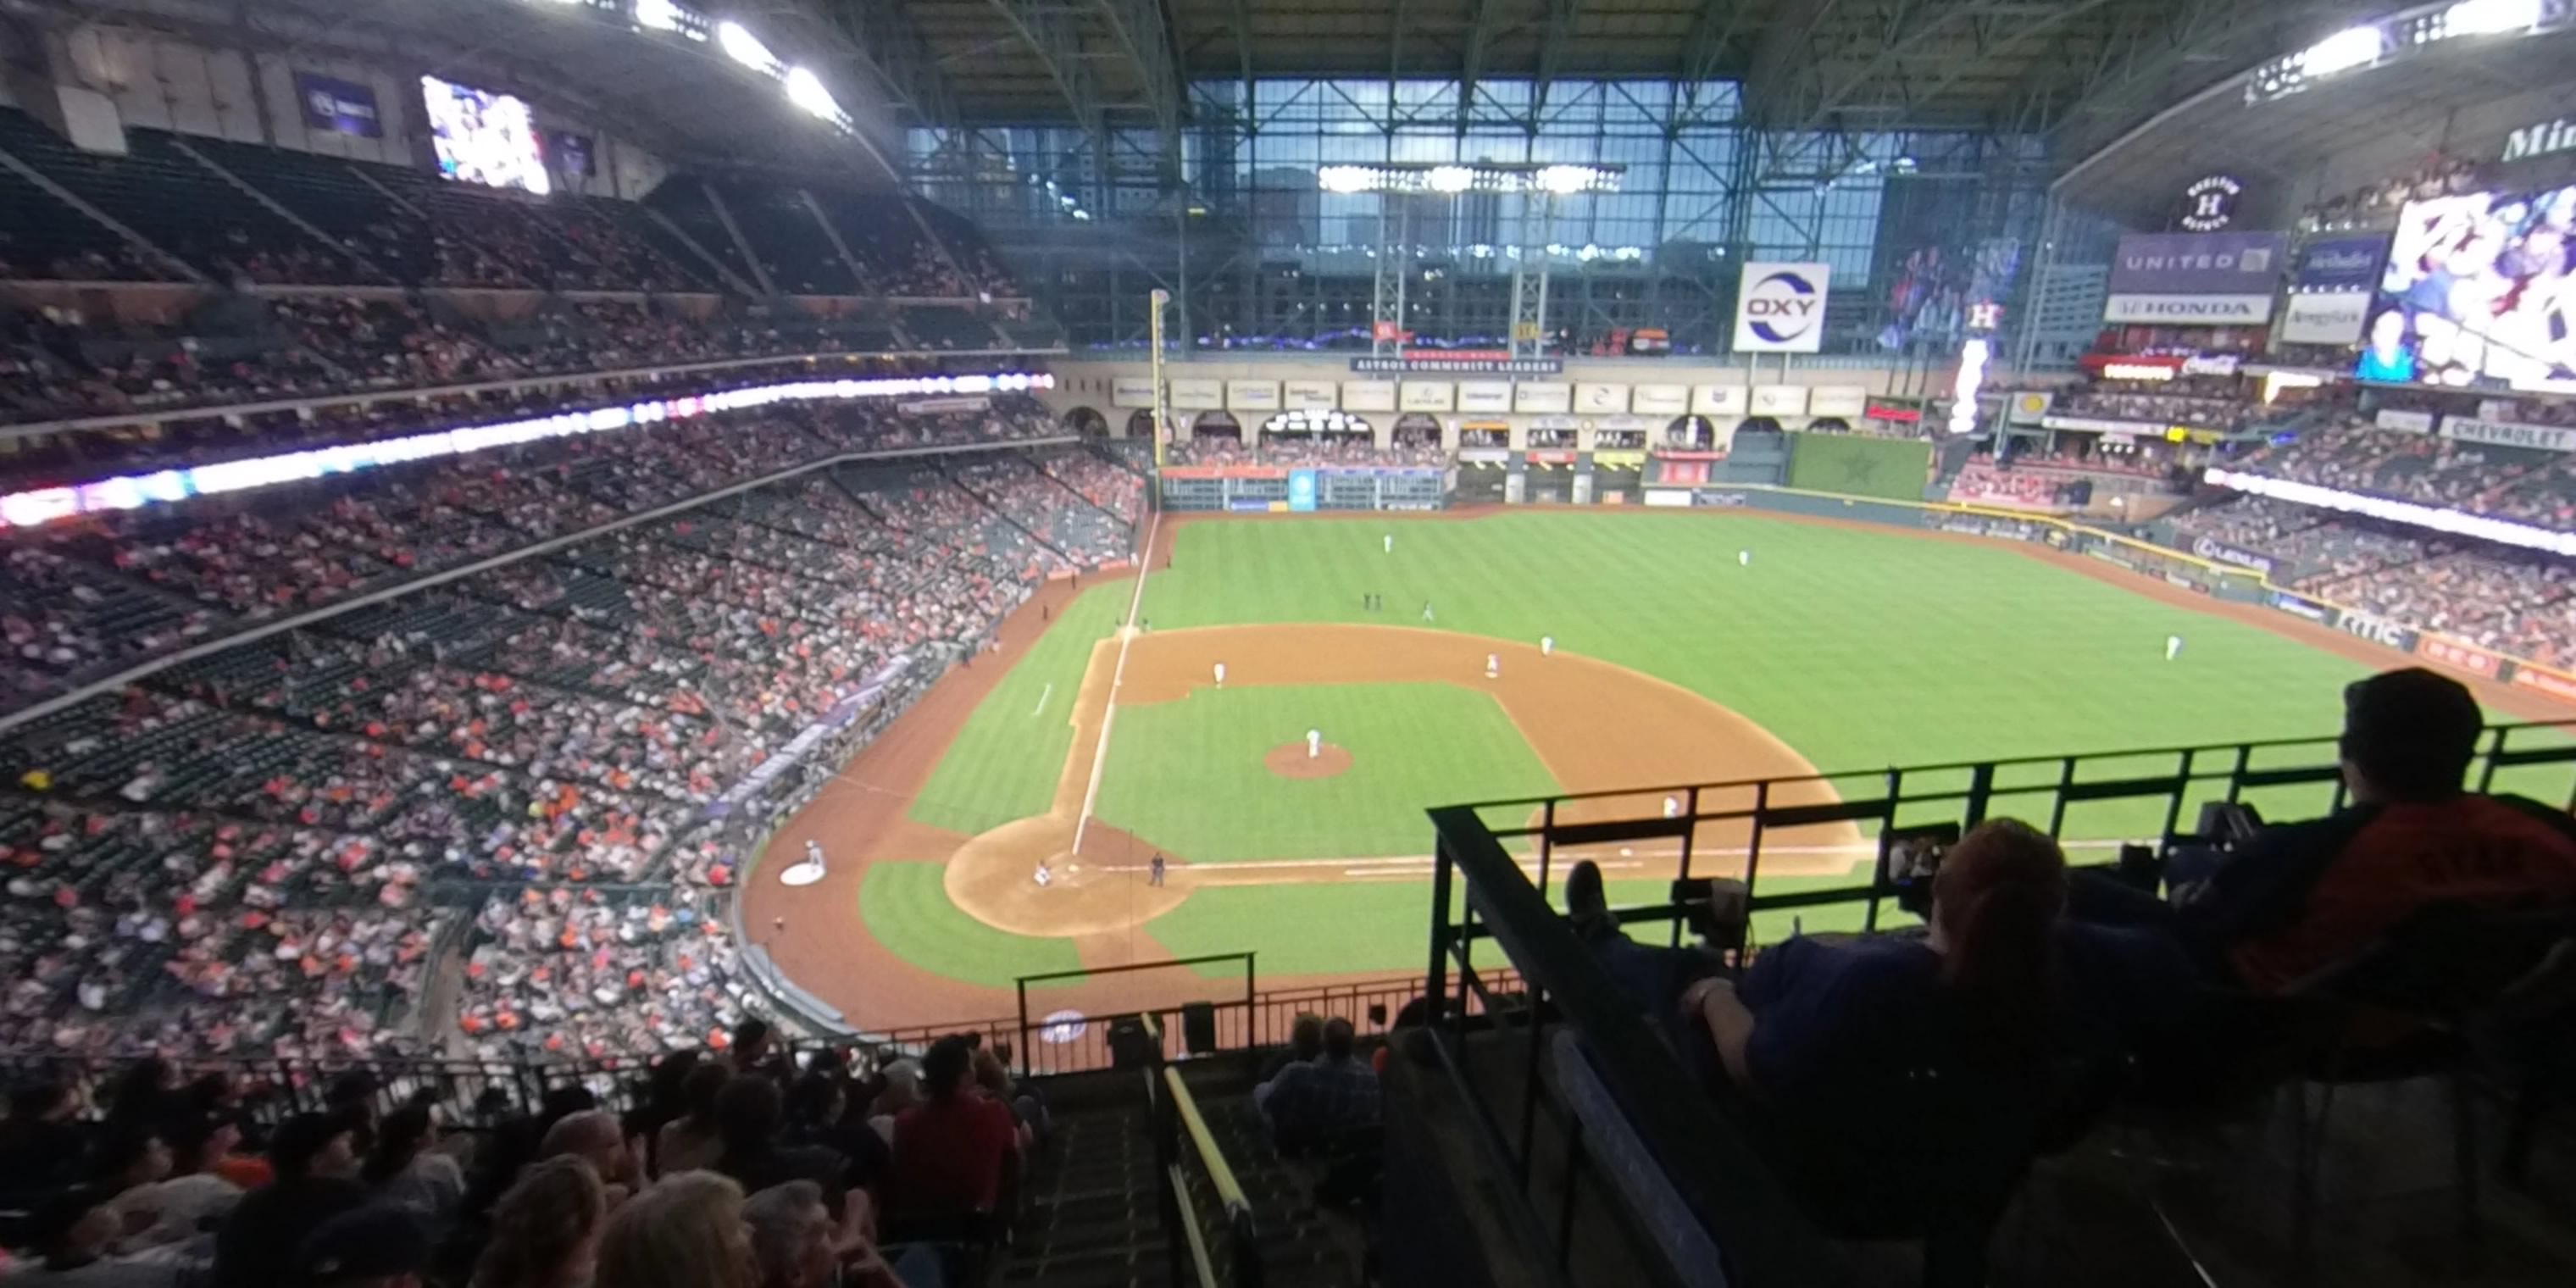 Section 324 at Minute Maid Park 